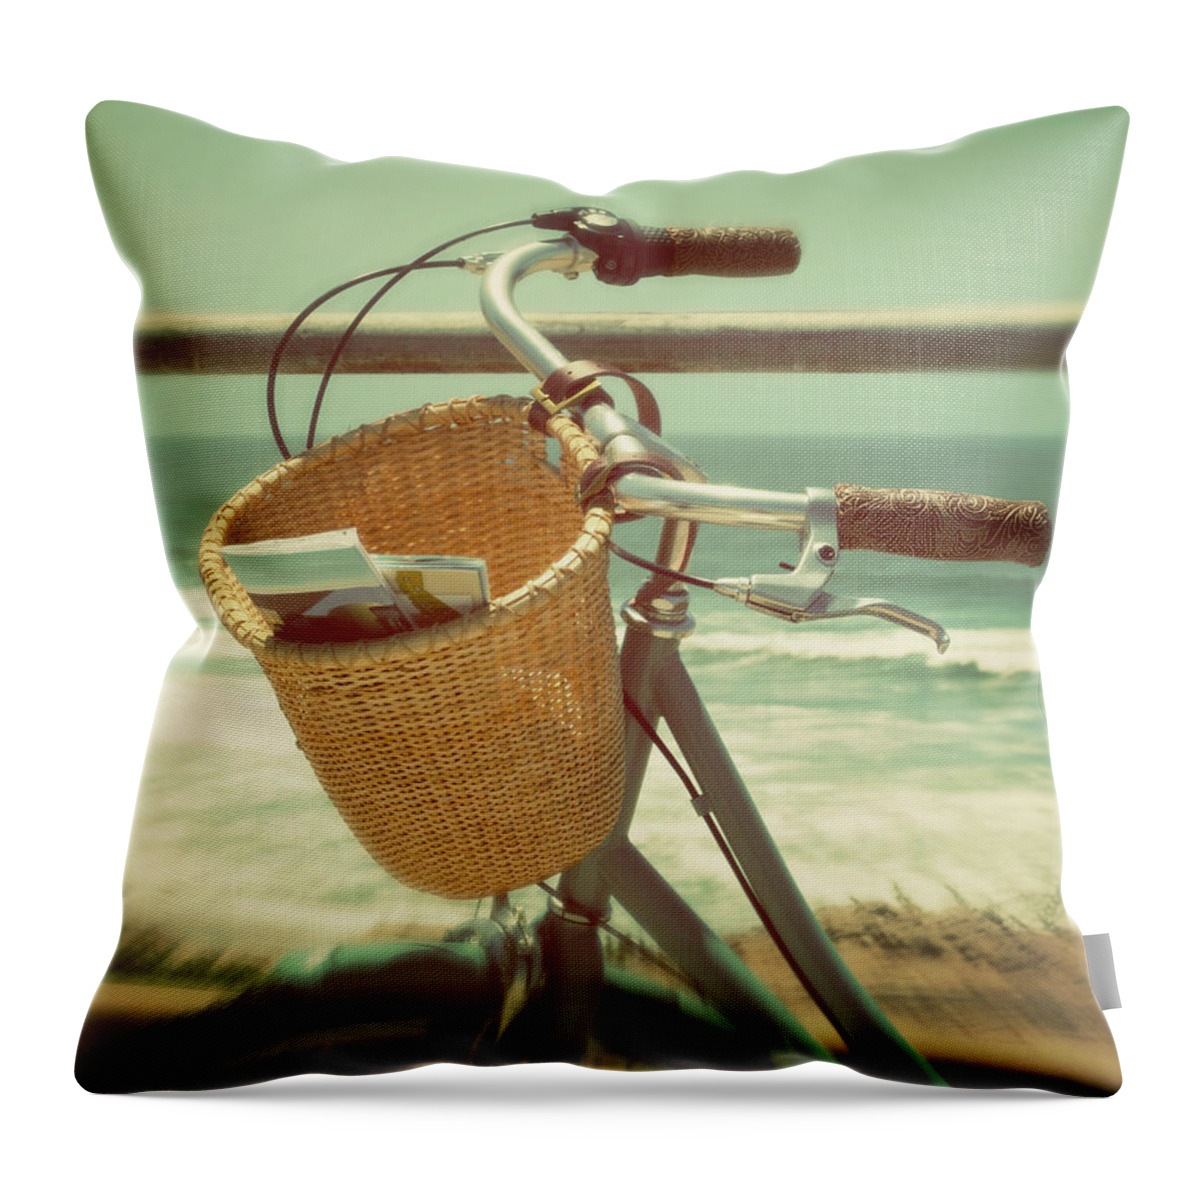 Tranquility Throw Pillow featuring the photograph Bike Overlooking Ocean by Suzanne Cummings